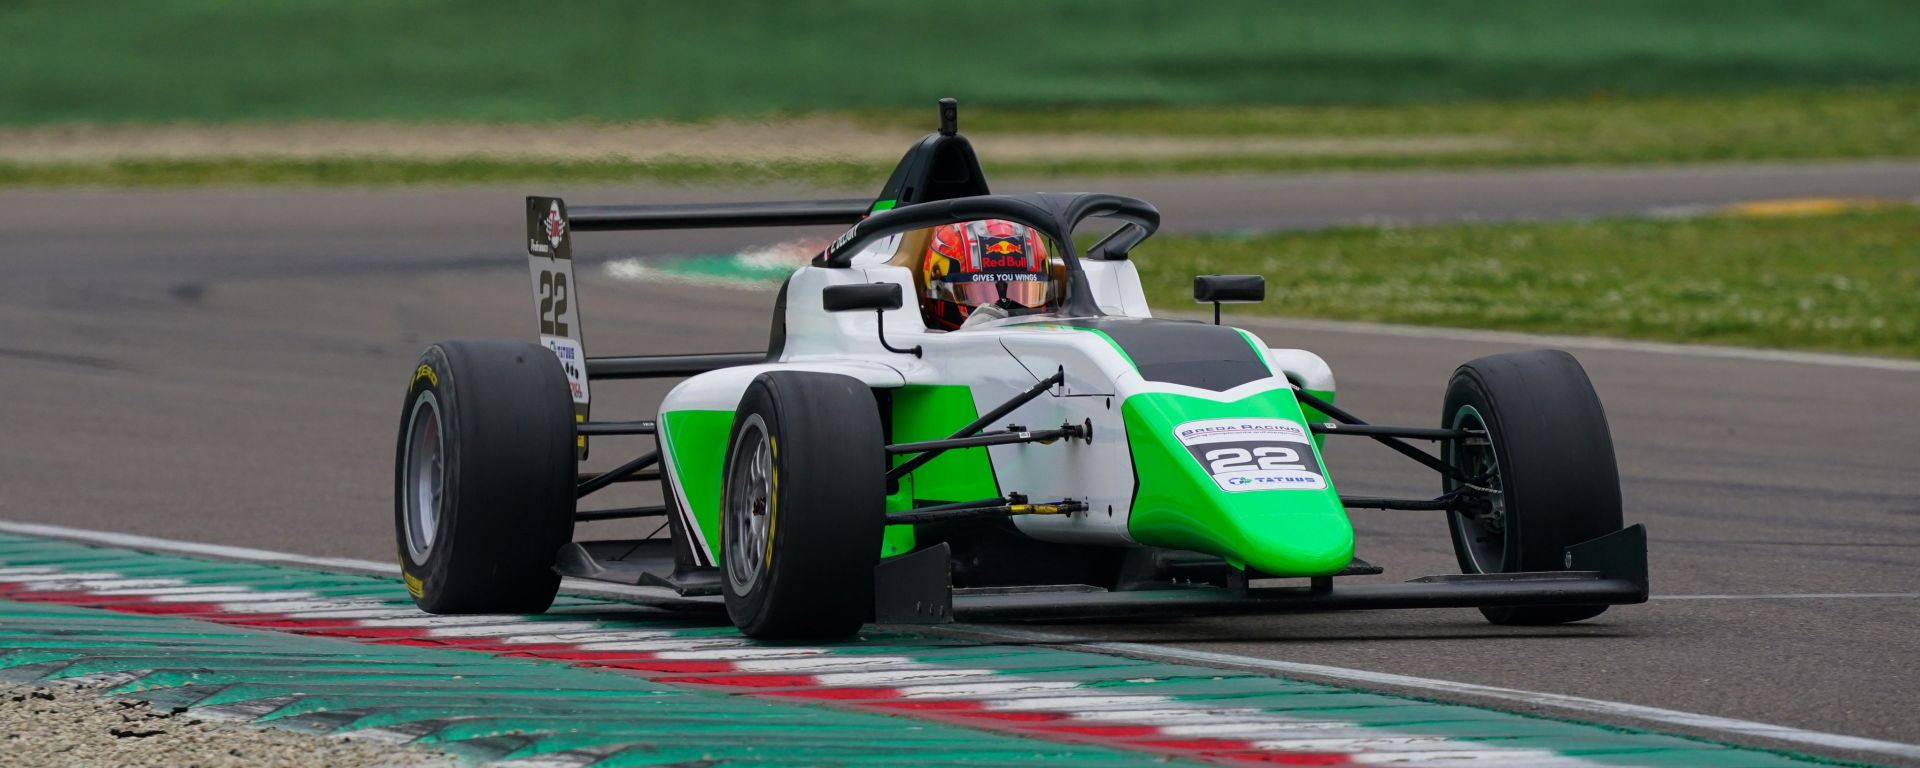 A green, white and black car with its right-side wheels against the rumble strips adorned with the Italian tricolore